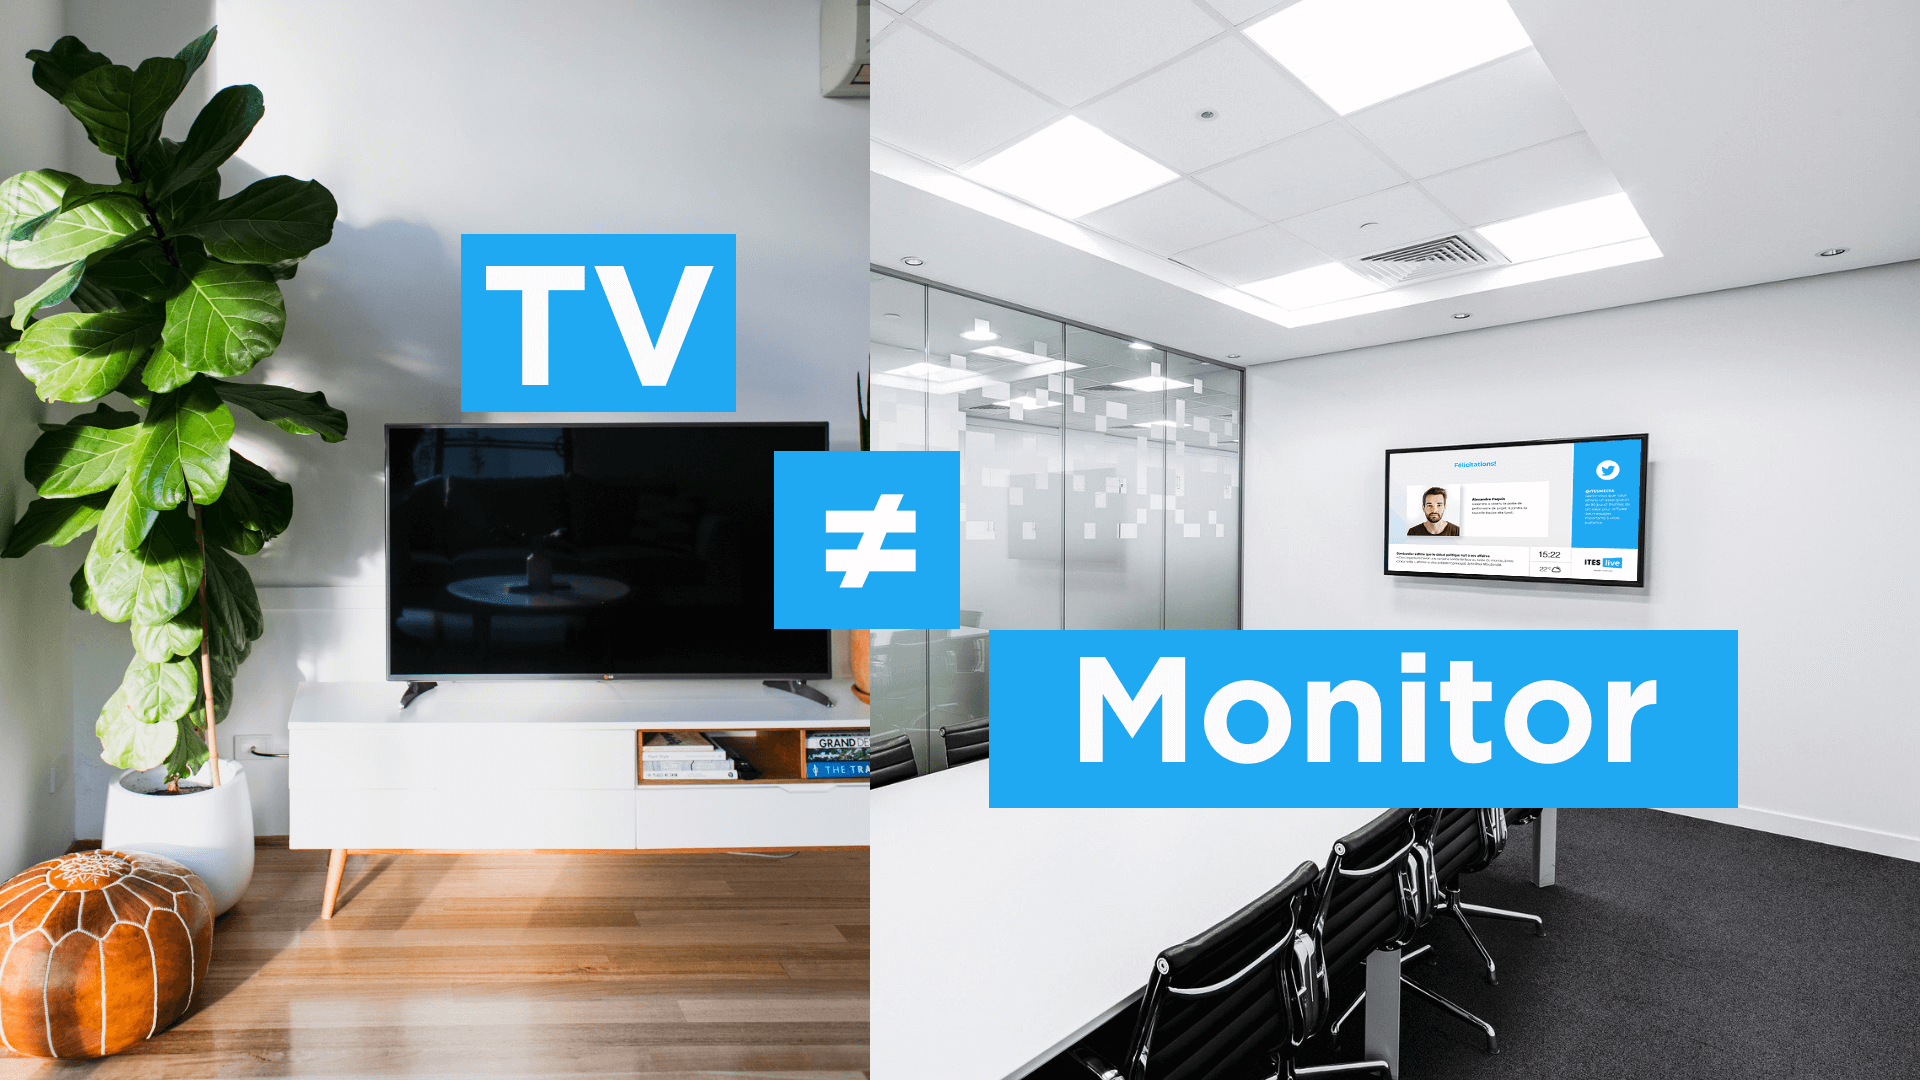 What are the differences between televisions and digital signage monitors?